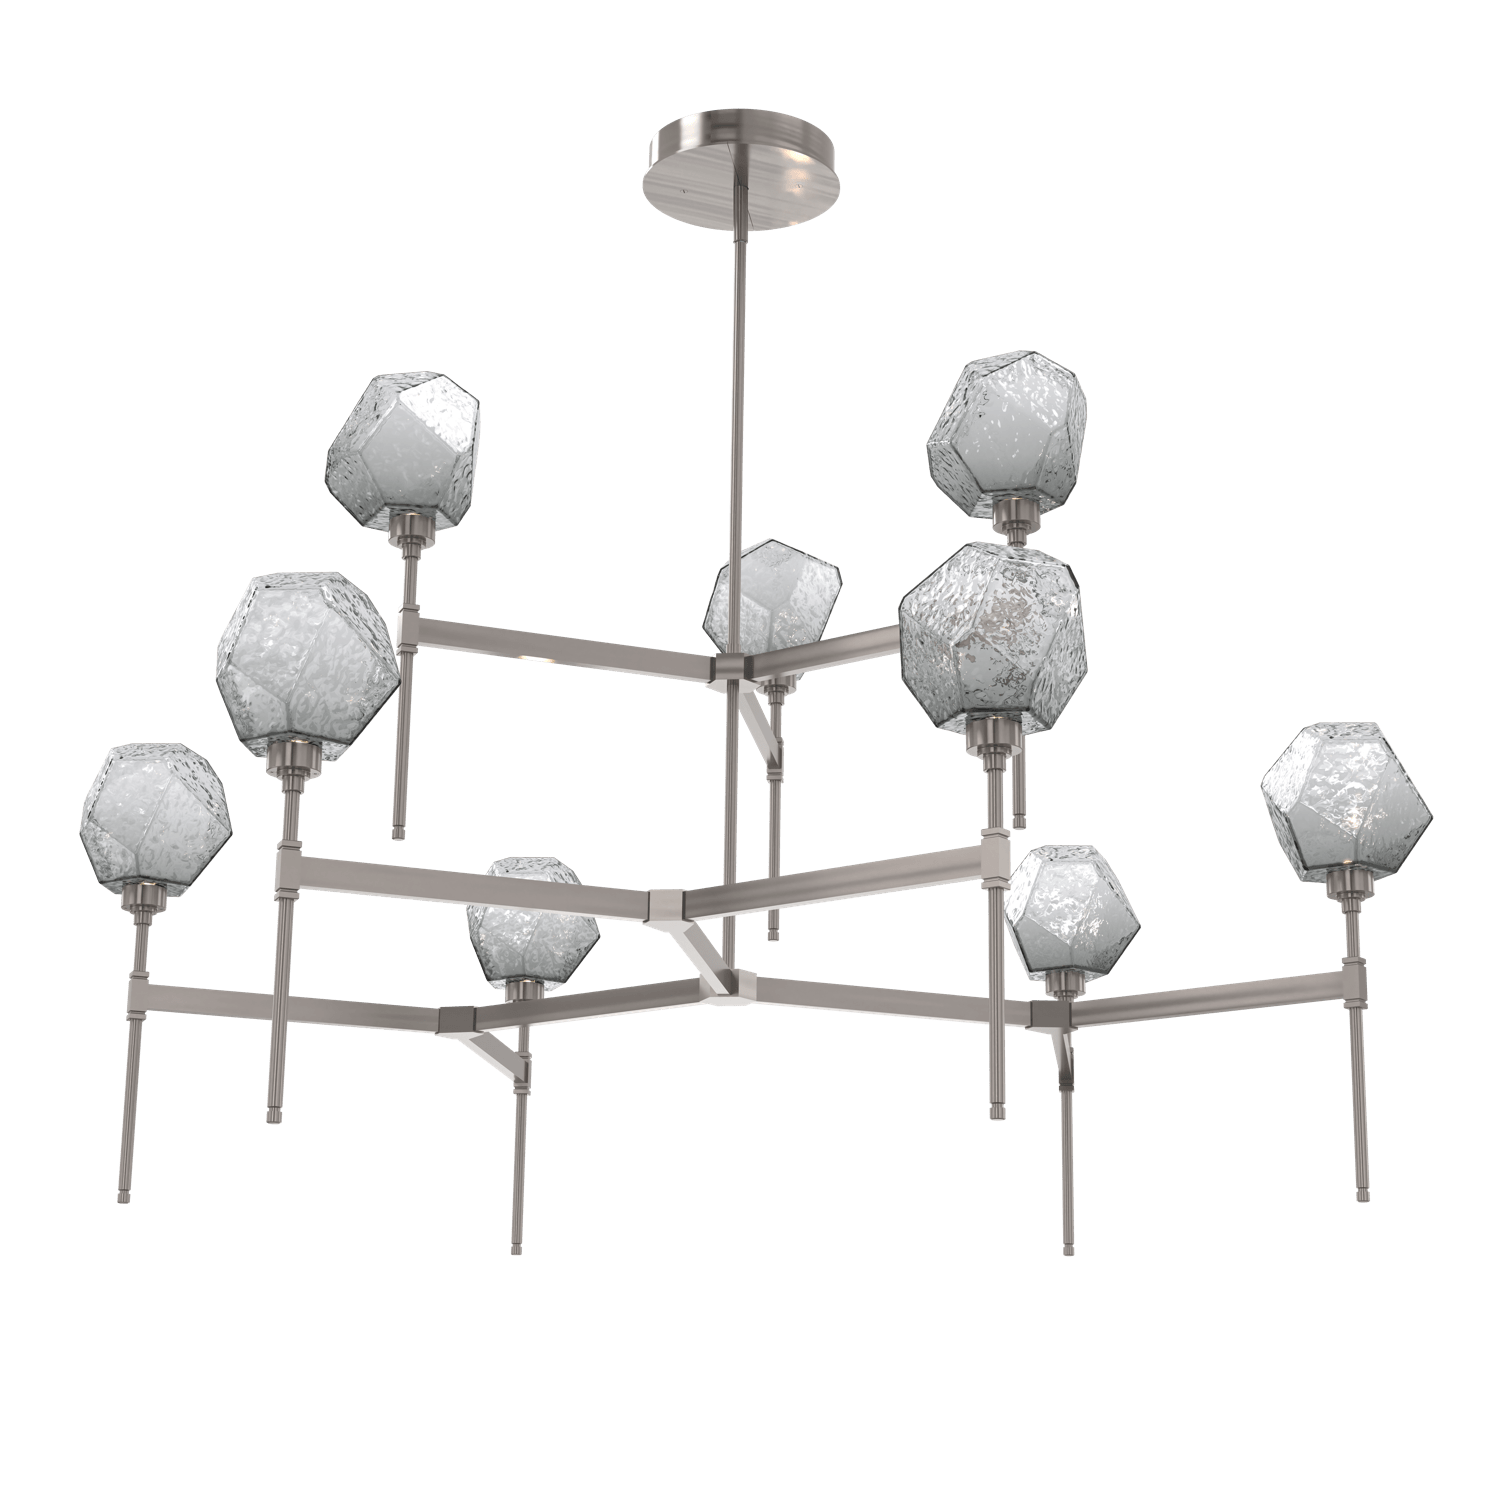 CHB0039-55-GM-S-Hammerton-Studio-Gem-round-two-tier-belvedere-chandelier-with-gunmetal-finish-and-smoke-blown-glass-shades-and-LED-lamping